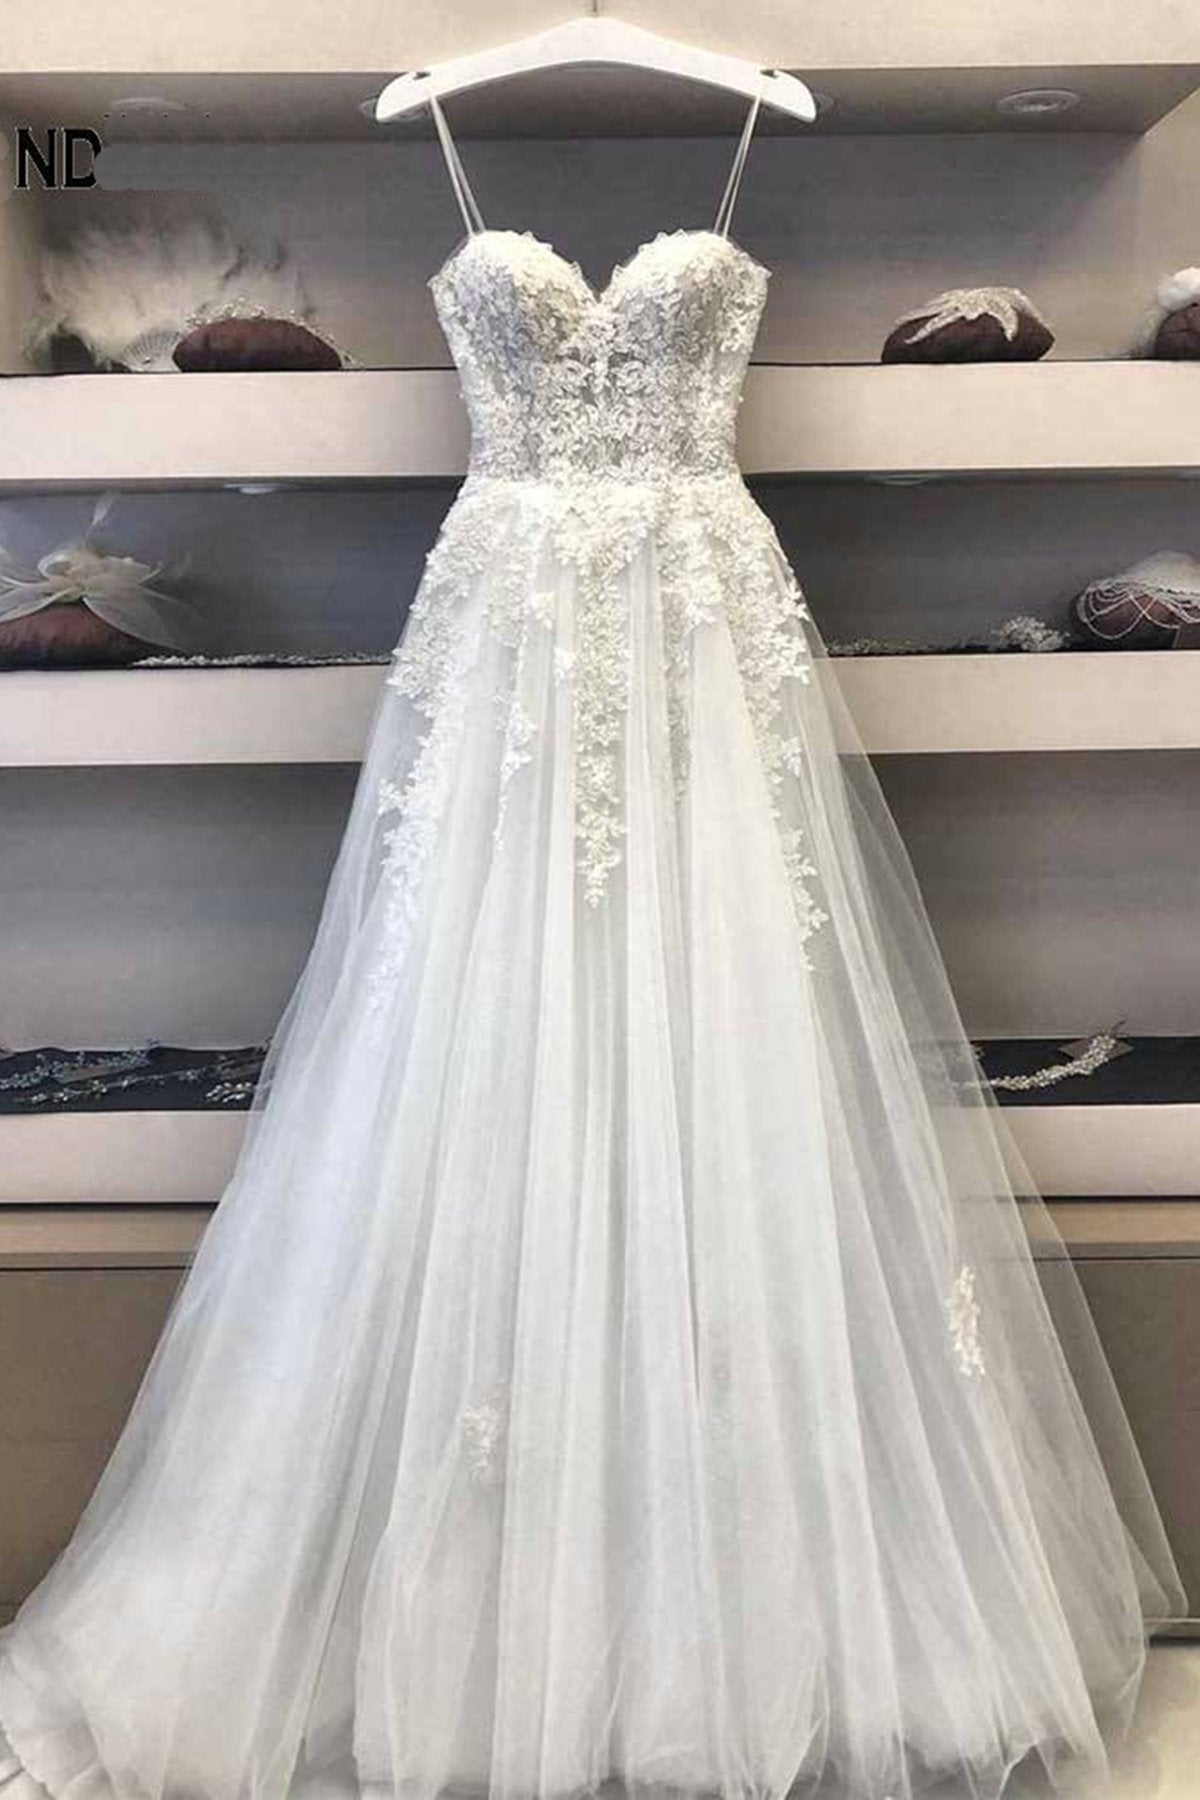 Modest Long A Line Sweetheart Lace Tulle Corset Wedding Dress outfit, Wedding Dress Shops Near Me